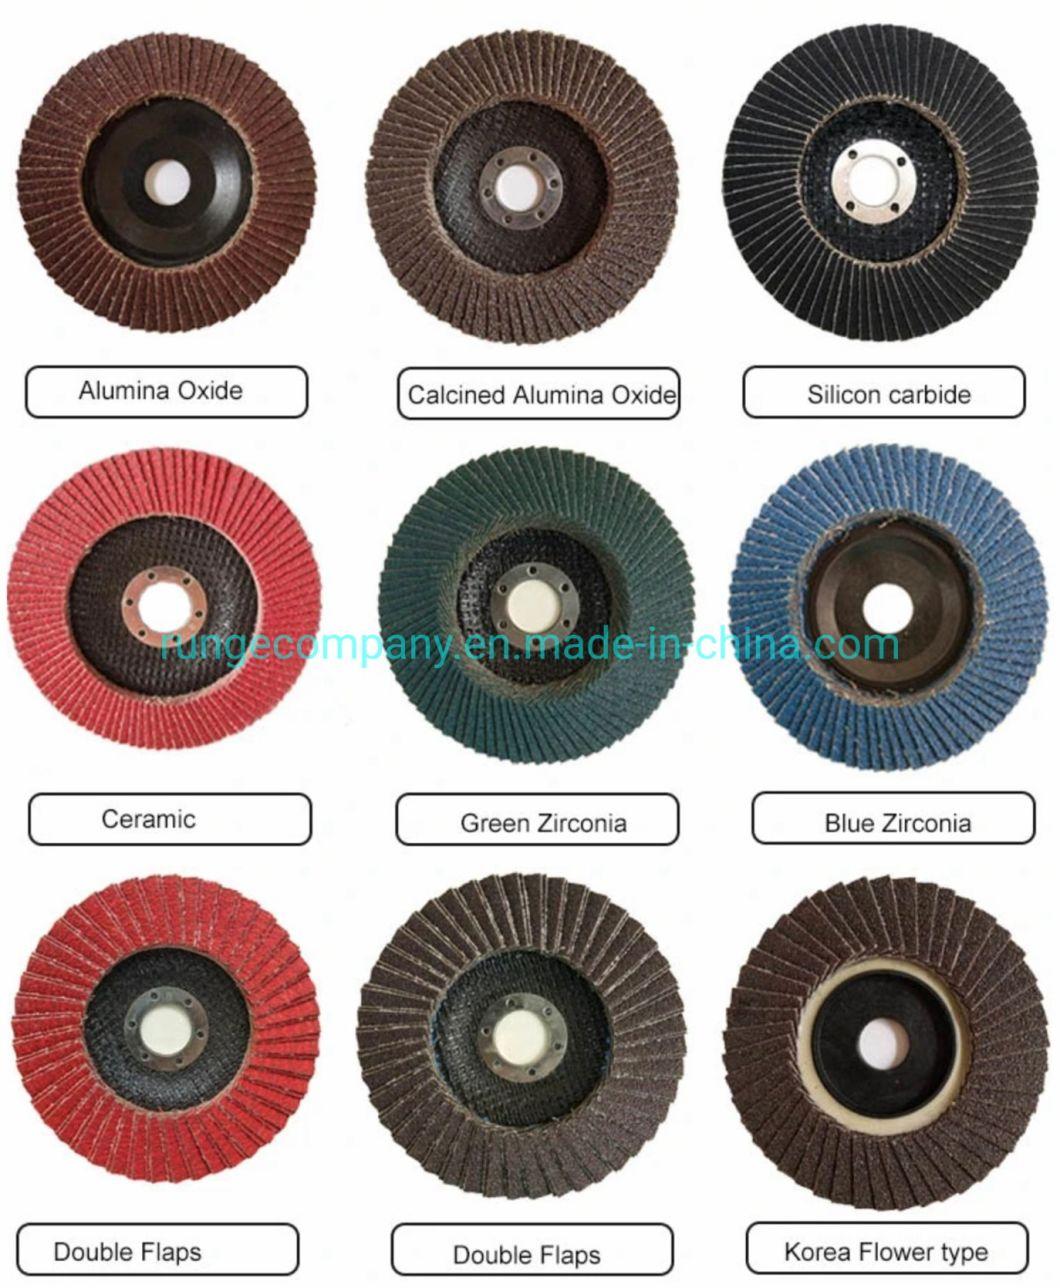 Power Electric Tools Parts German 4.5" Cutting Disc for Angle Grinder All Ferrous Metals, Stainless Steel Inox T41